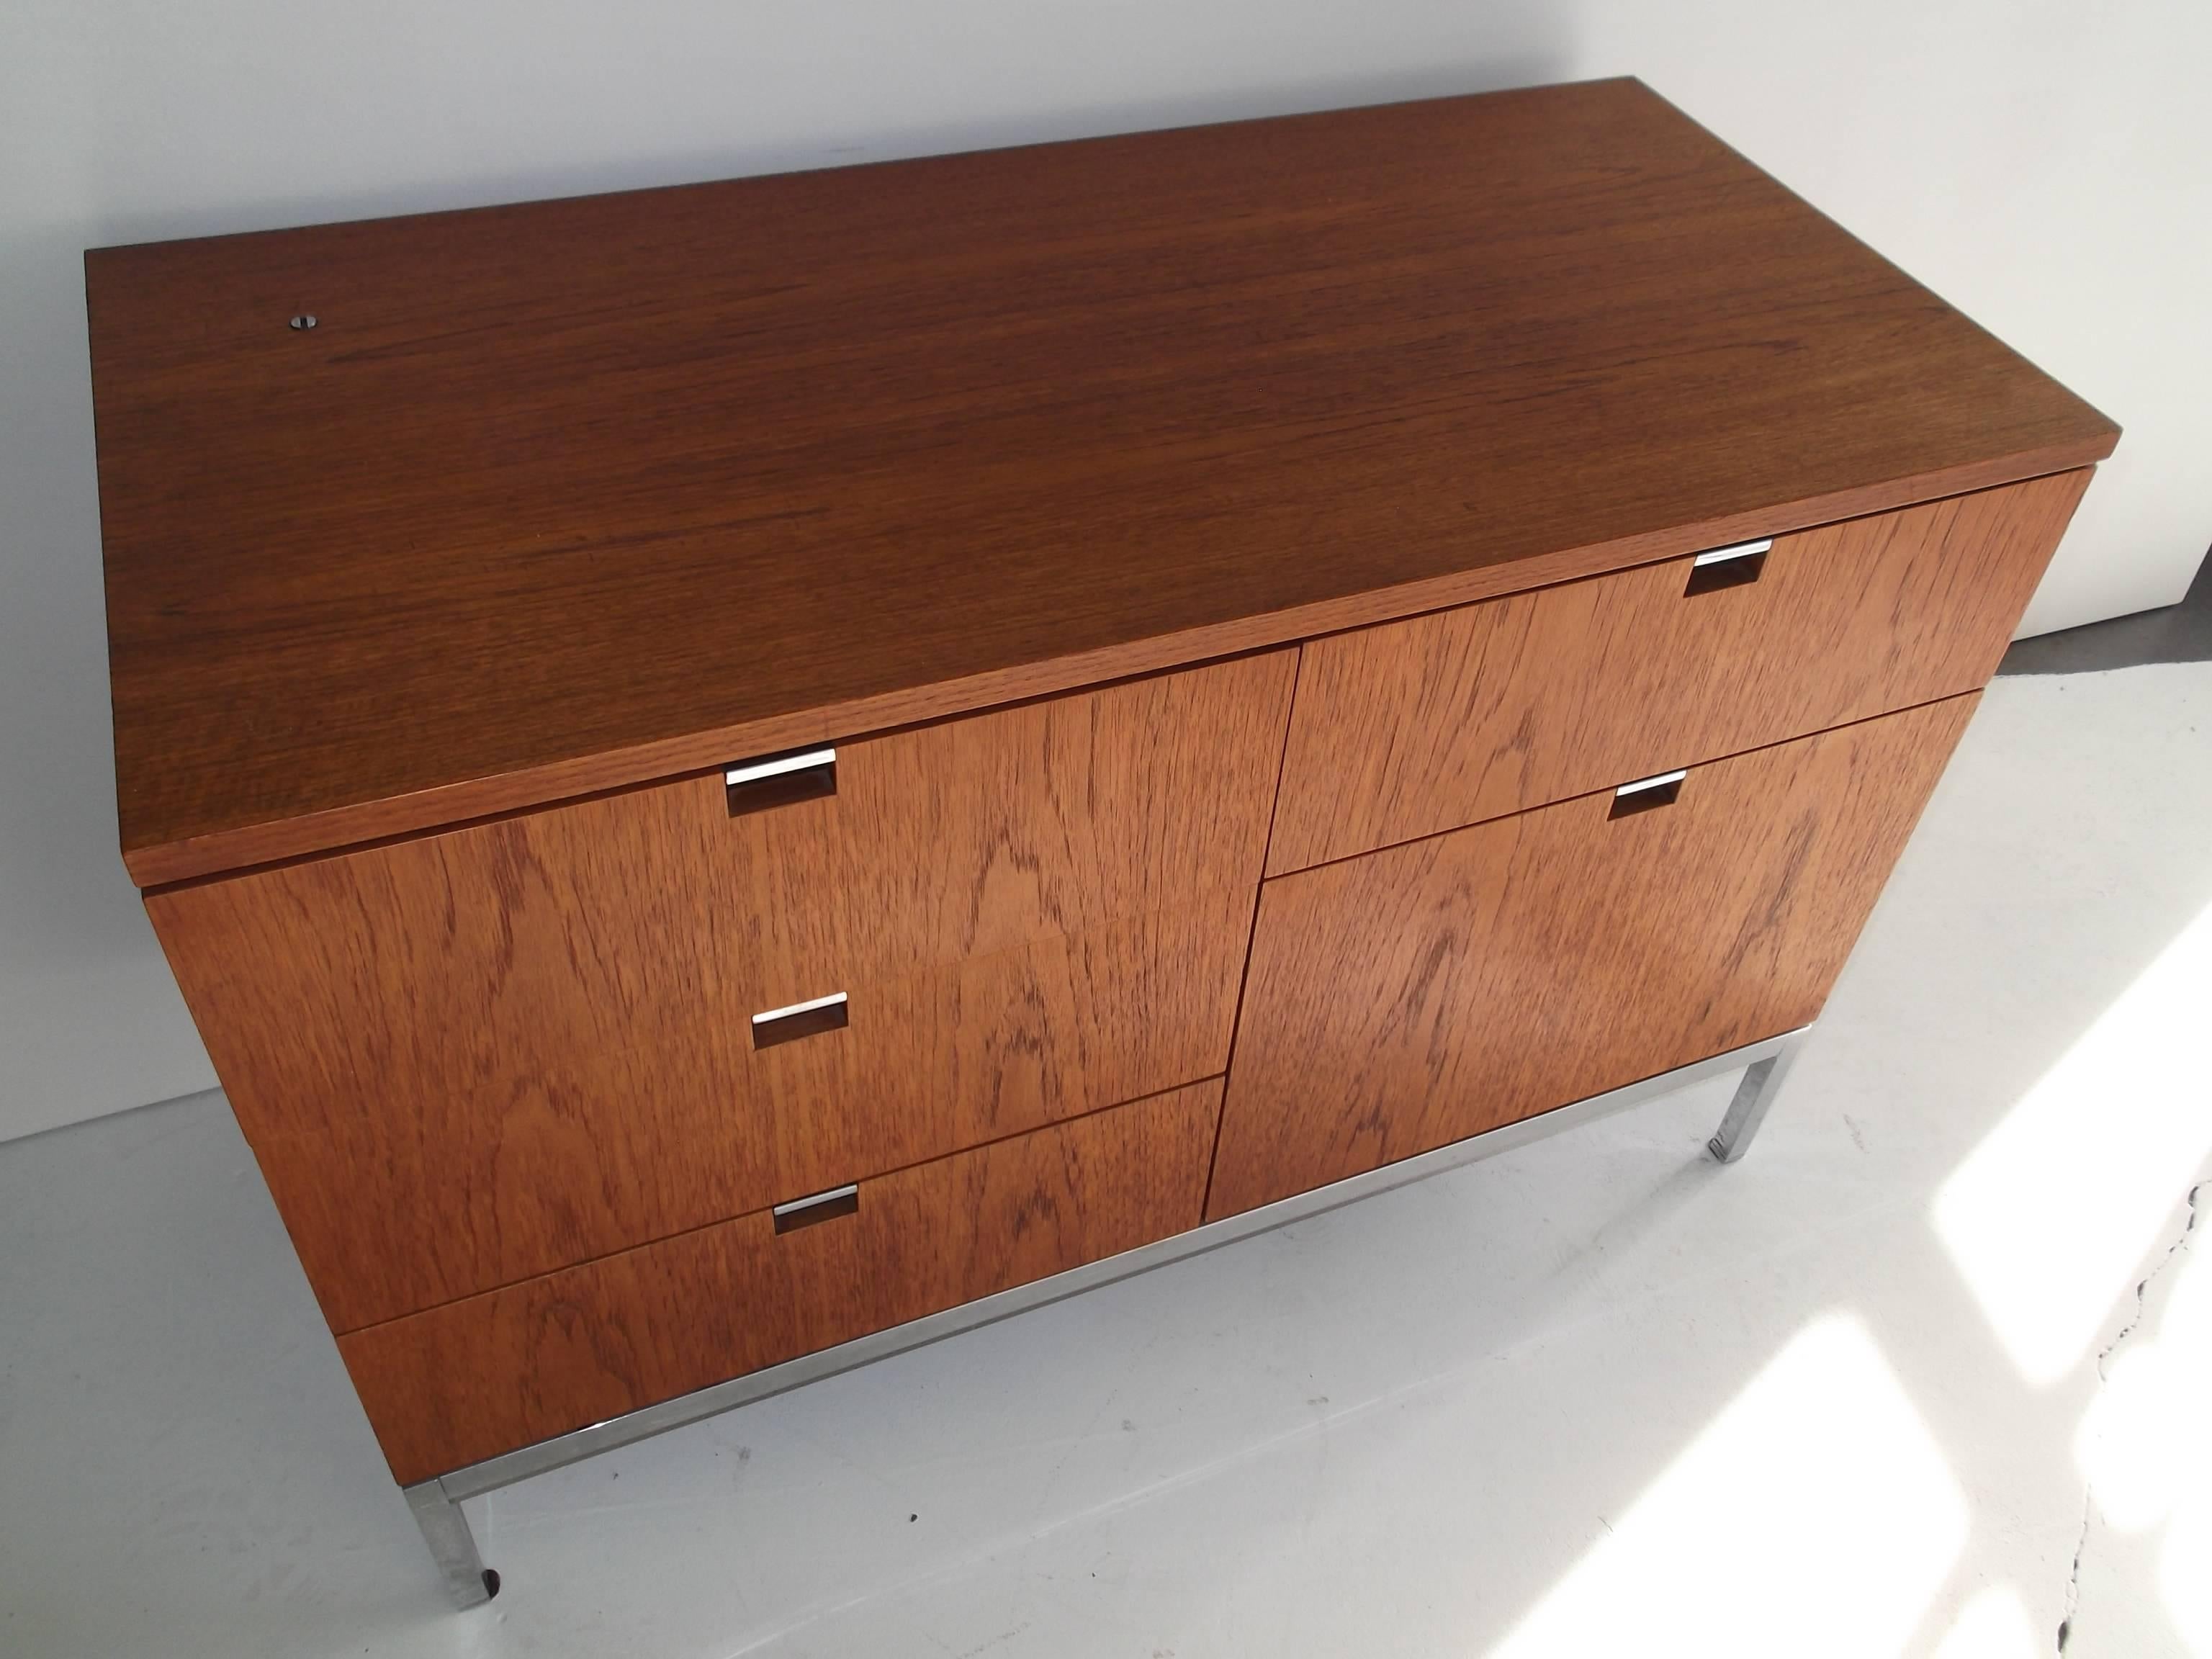 This is a small size five-drawer storage credenza. It is unusual to find them in teak. For its size, it weighs a ton. It retains partial 1970s era label to bottom. Top drawers have dividers.